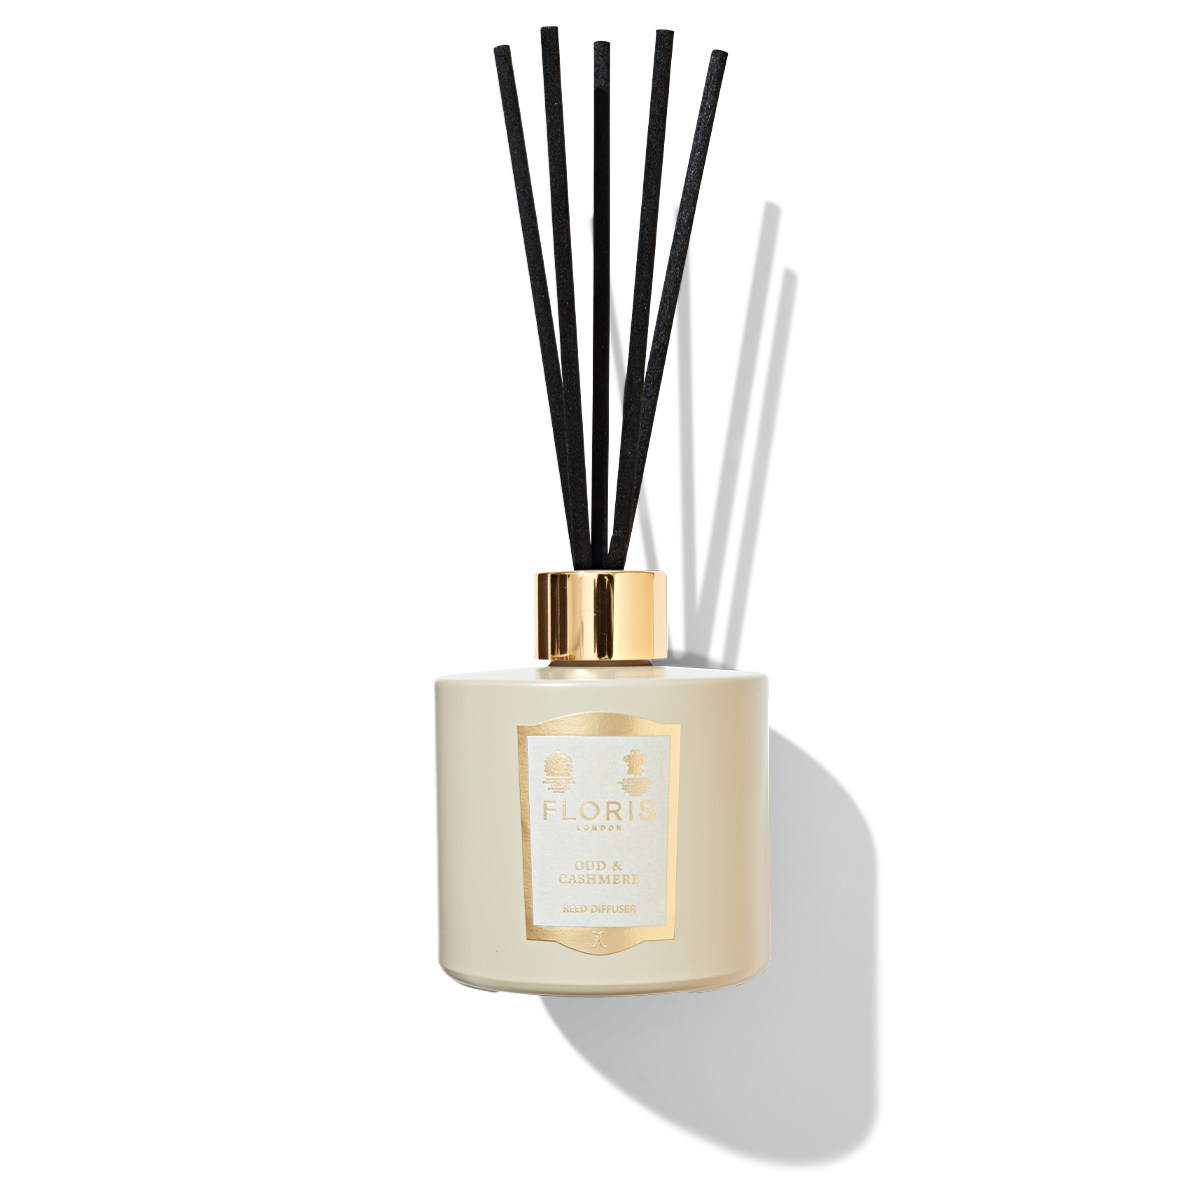 Oud & Cashmere Reed Diffuser in a beige coloured jar with a cream and gold label, shiny gold cap and 5 black reeds. 